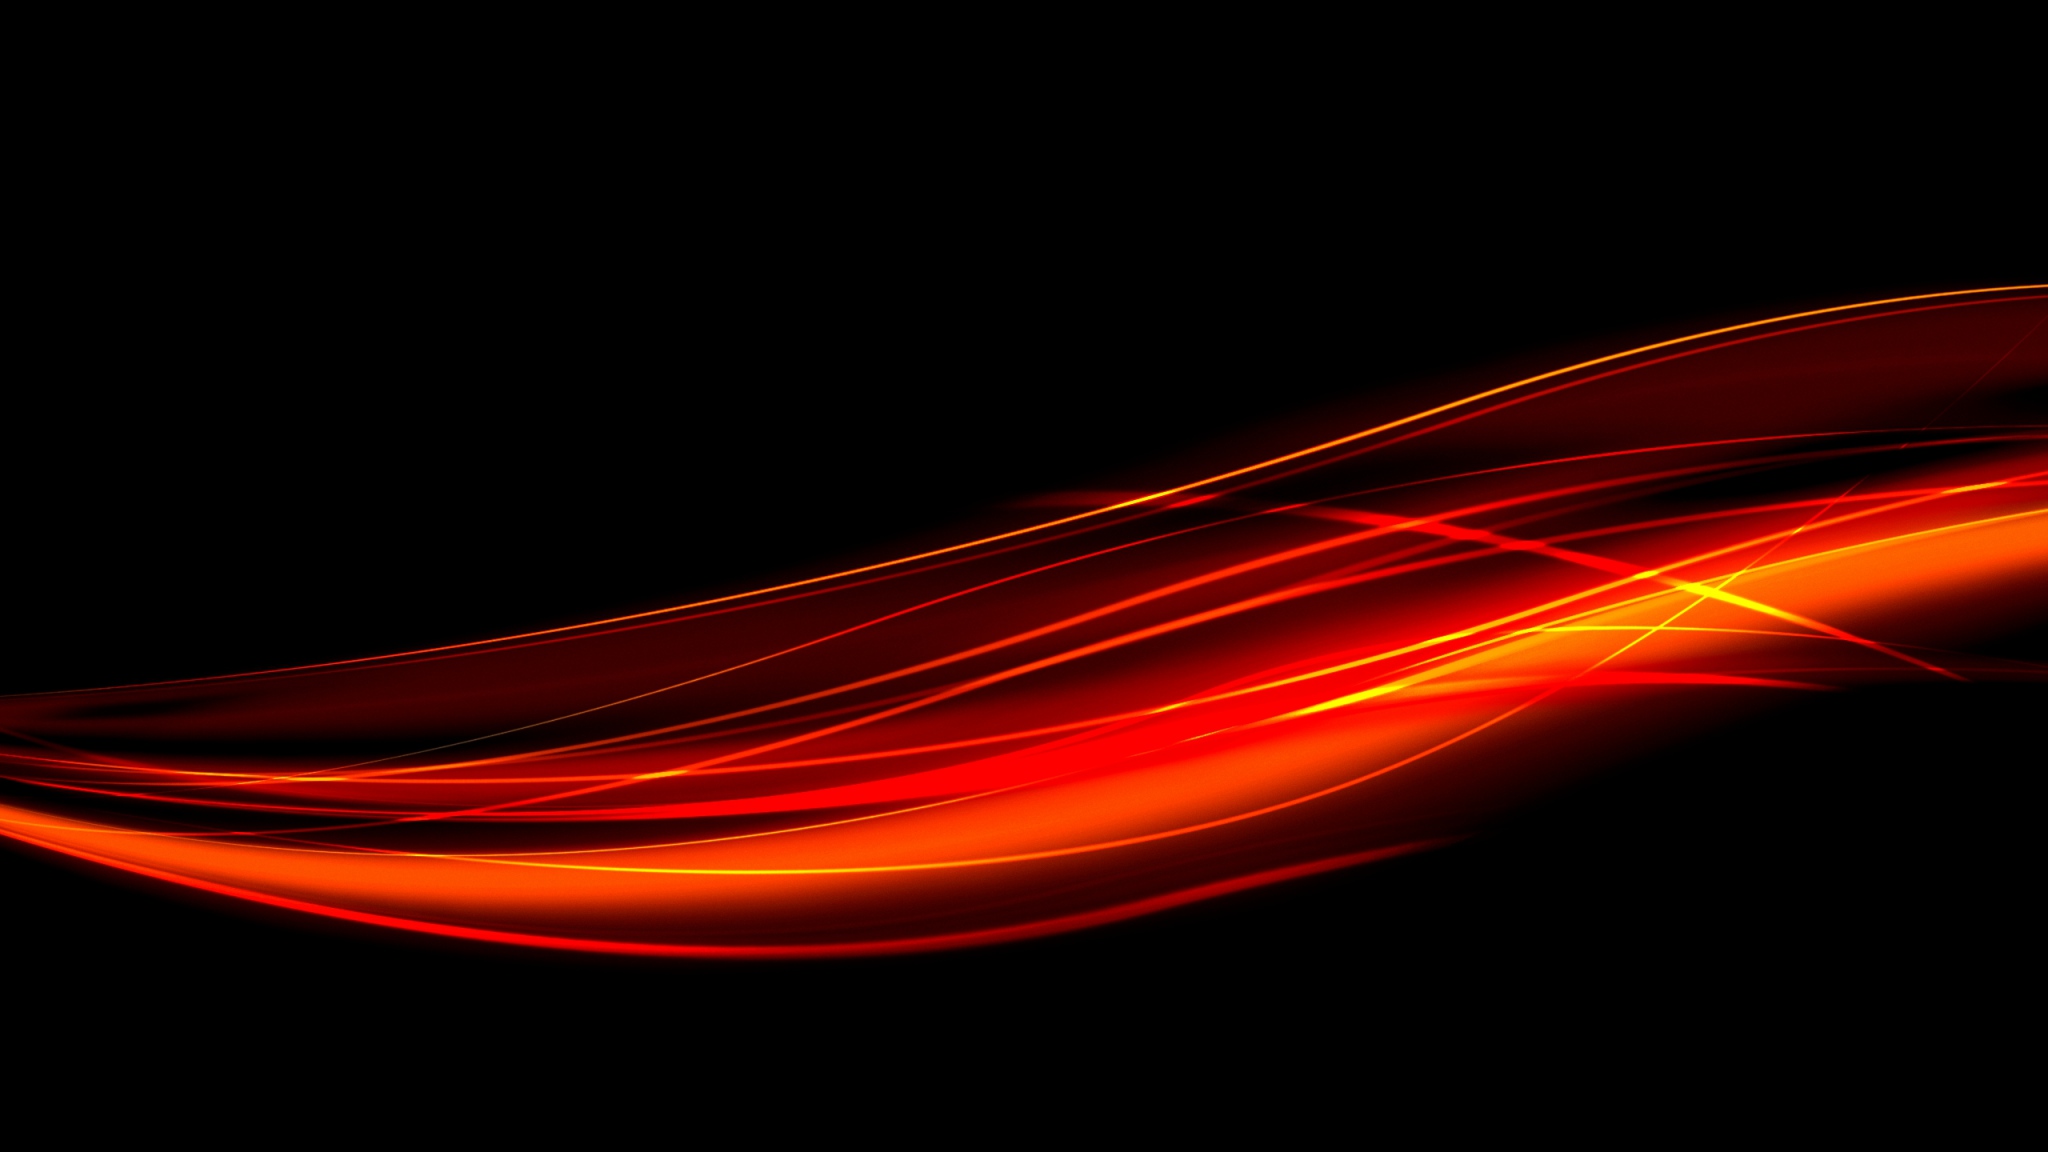 Free Download Download Wallpaper 48x1152 Black Red Line Light Hd Hd Background 48x1152 For Your Desktop Mobile Tablet Explore 49 48x1152 Wallpaper Background Hd 48x1152 Wallpaper For Youtube Hd